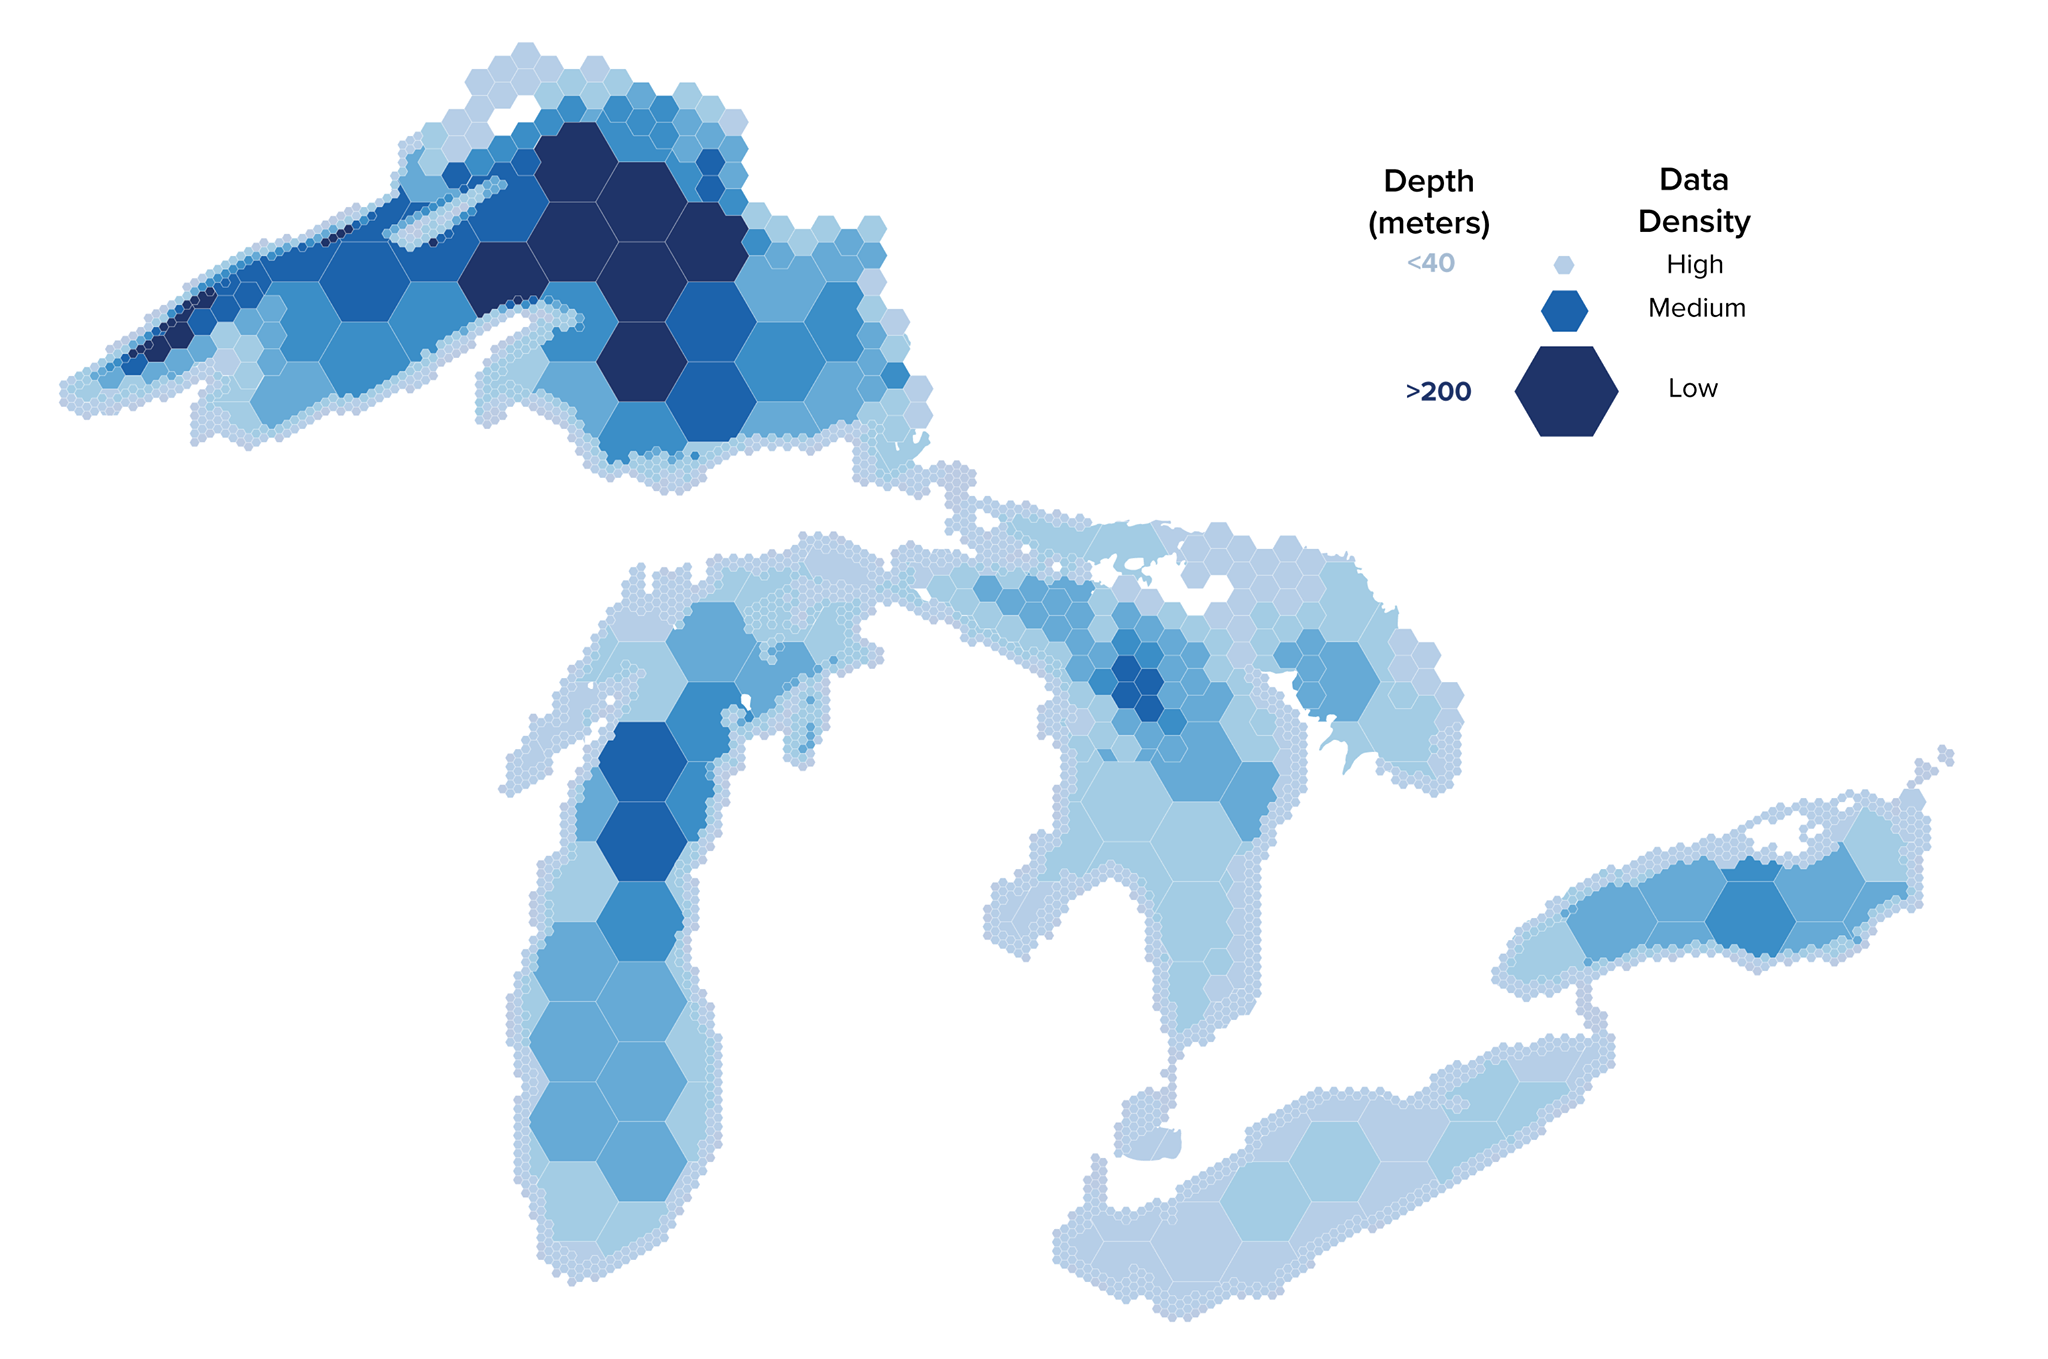 New Project Sets Out to Map Great Lakes